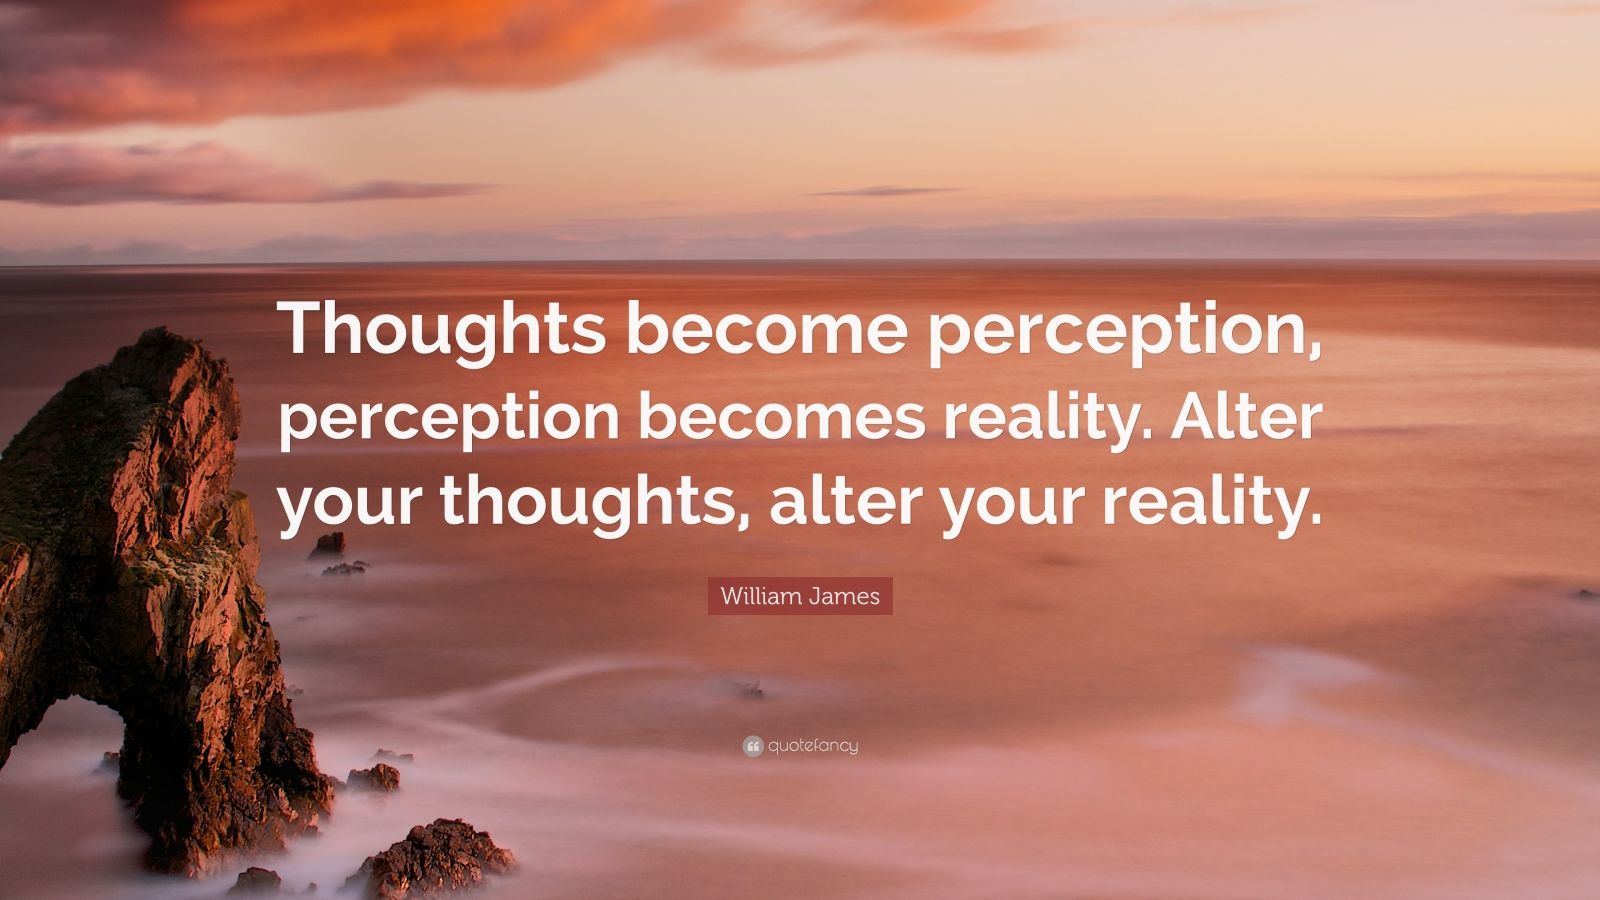 William James Quote: “Thoughts become perception, perception becomes ...